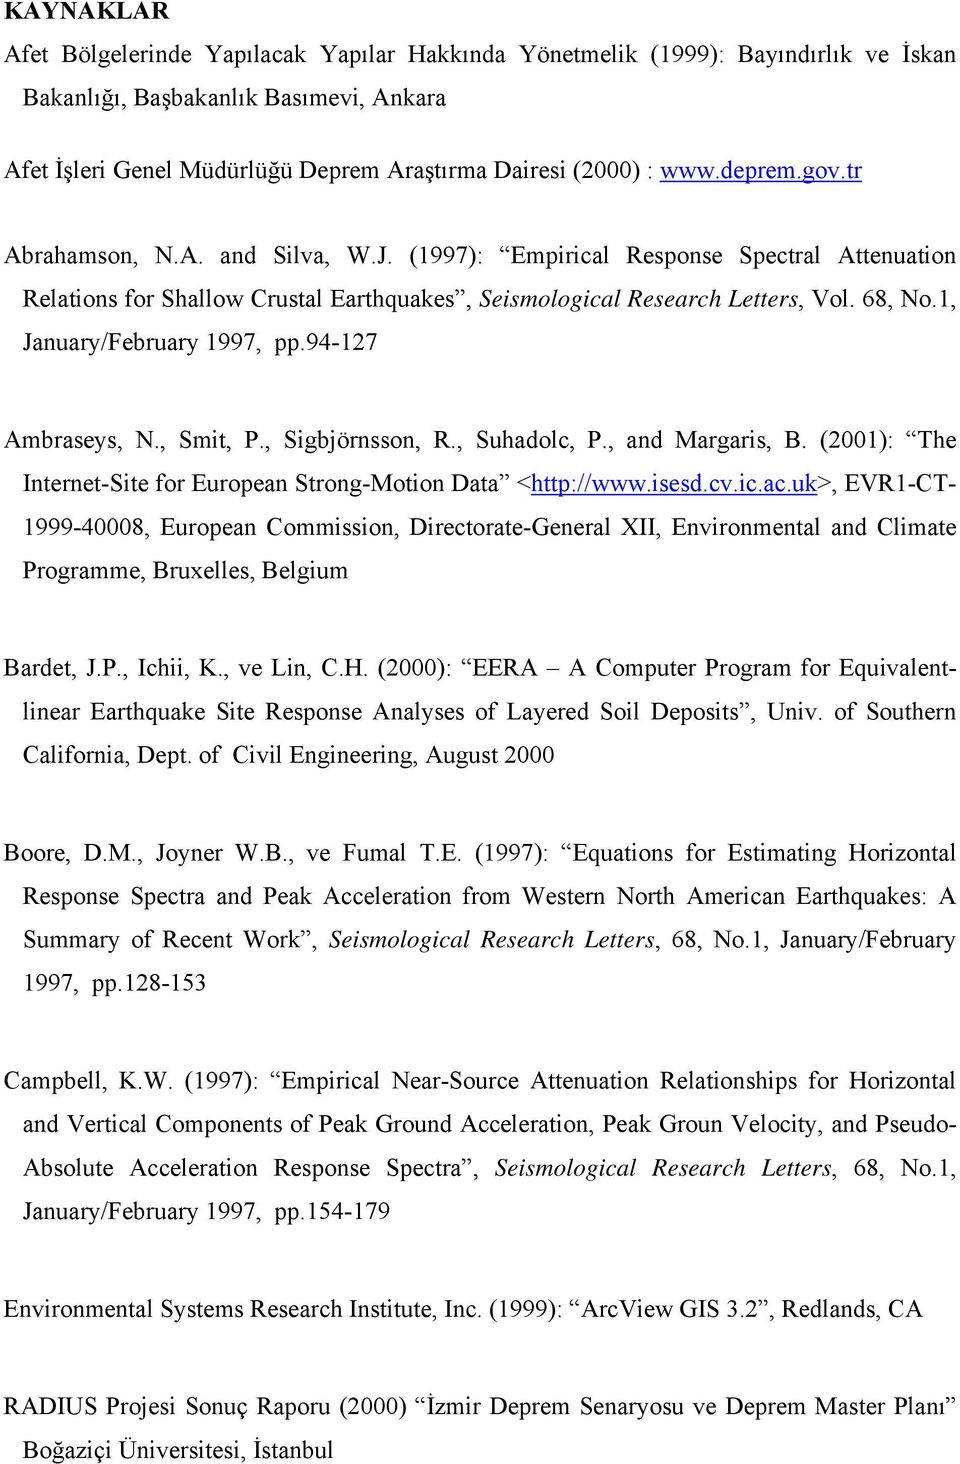 1, January/February 1997, pp.94-127 Ambraseys, N., Smit, P., Sigbjörnsson, R., Suhadolc, P., and Margaris, B. (2001): The Internet-Site for European Strong-Motion Data <http://www.isesd.cv.ic.ac.